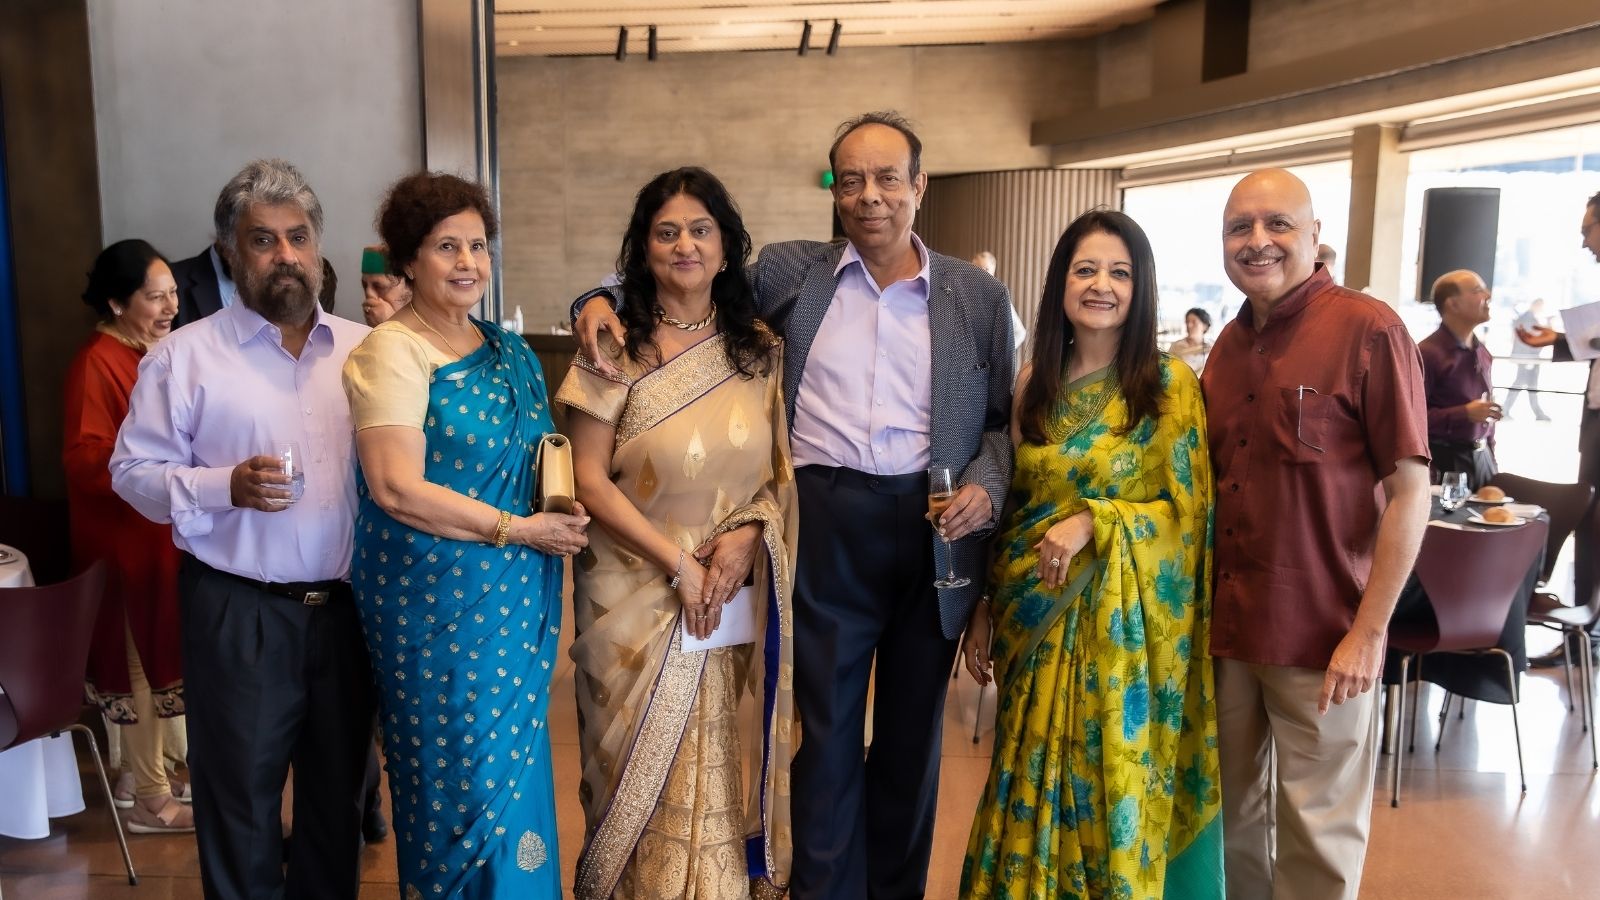 A group of people dressed in saris and suits, gathered for a photo.